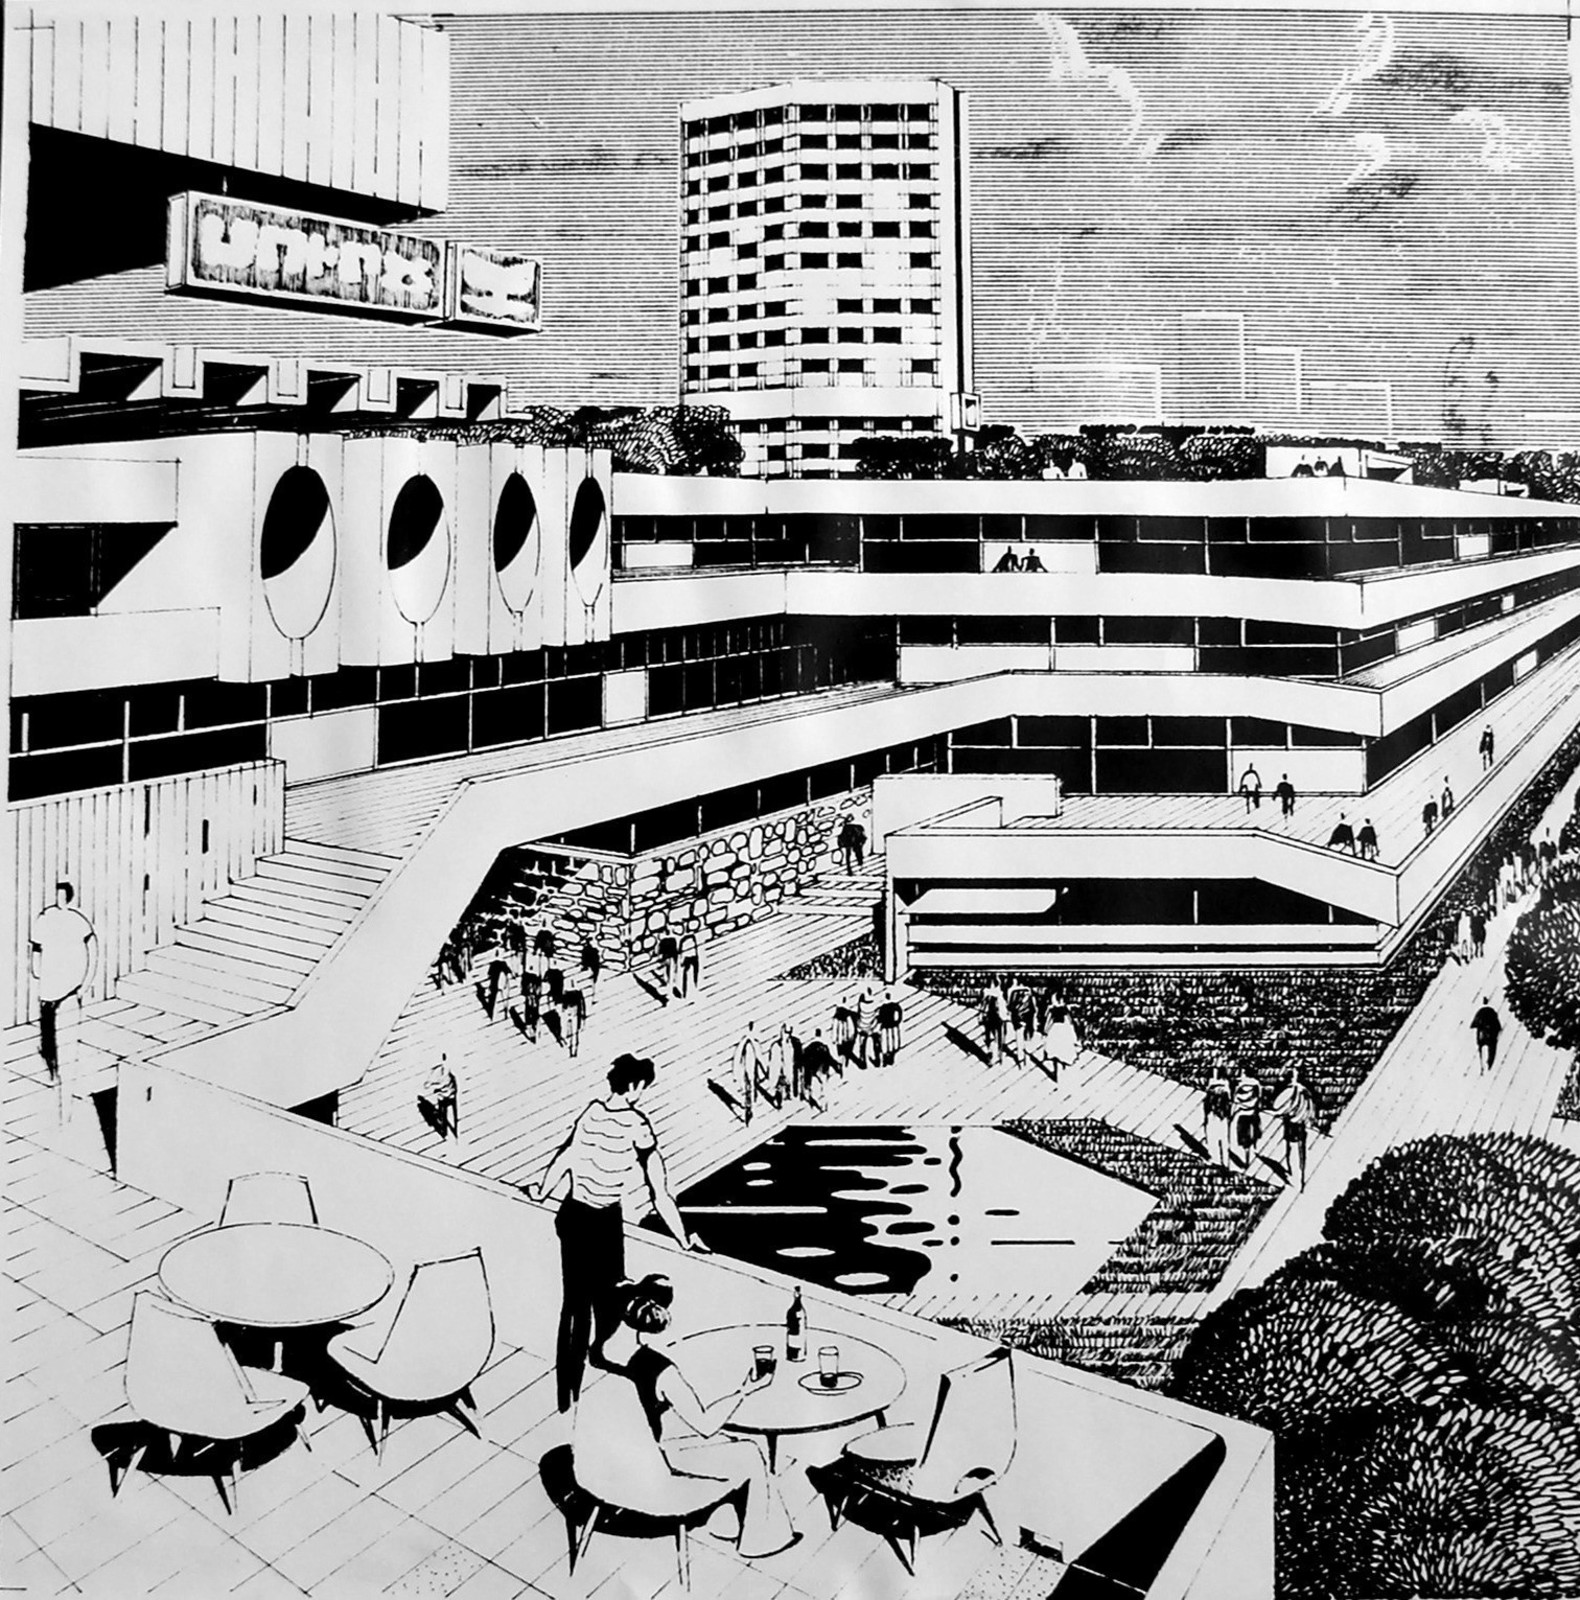 Sketch of Central Business district in Residential Area, Yerevan/Armenia, late 1970s. Architect: M. Tovmasyan